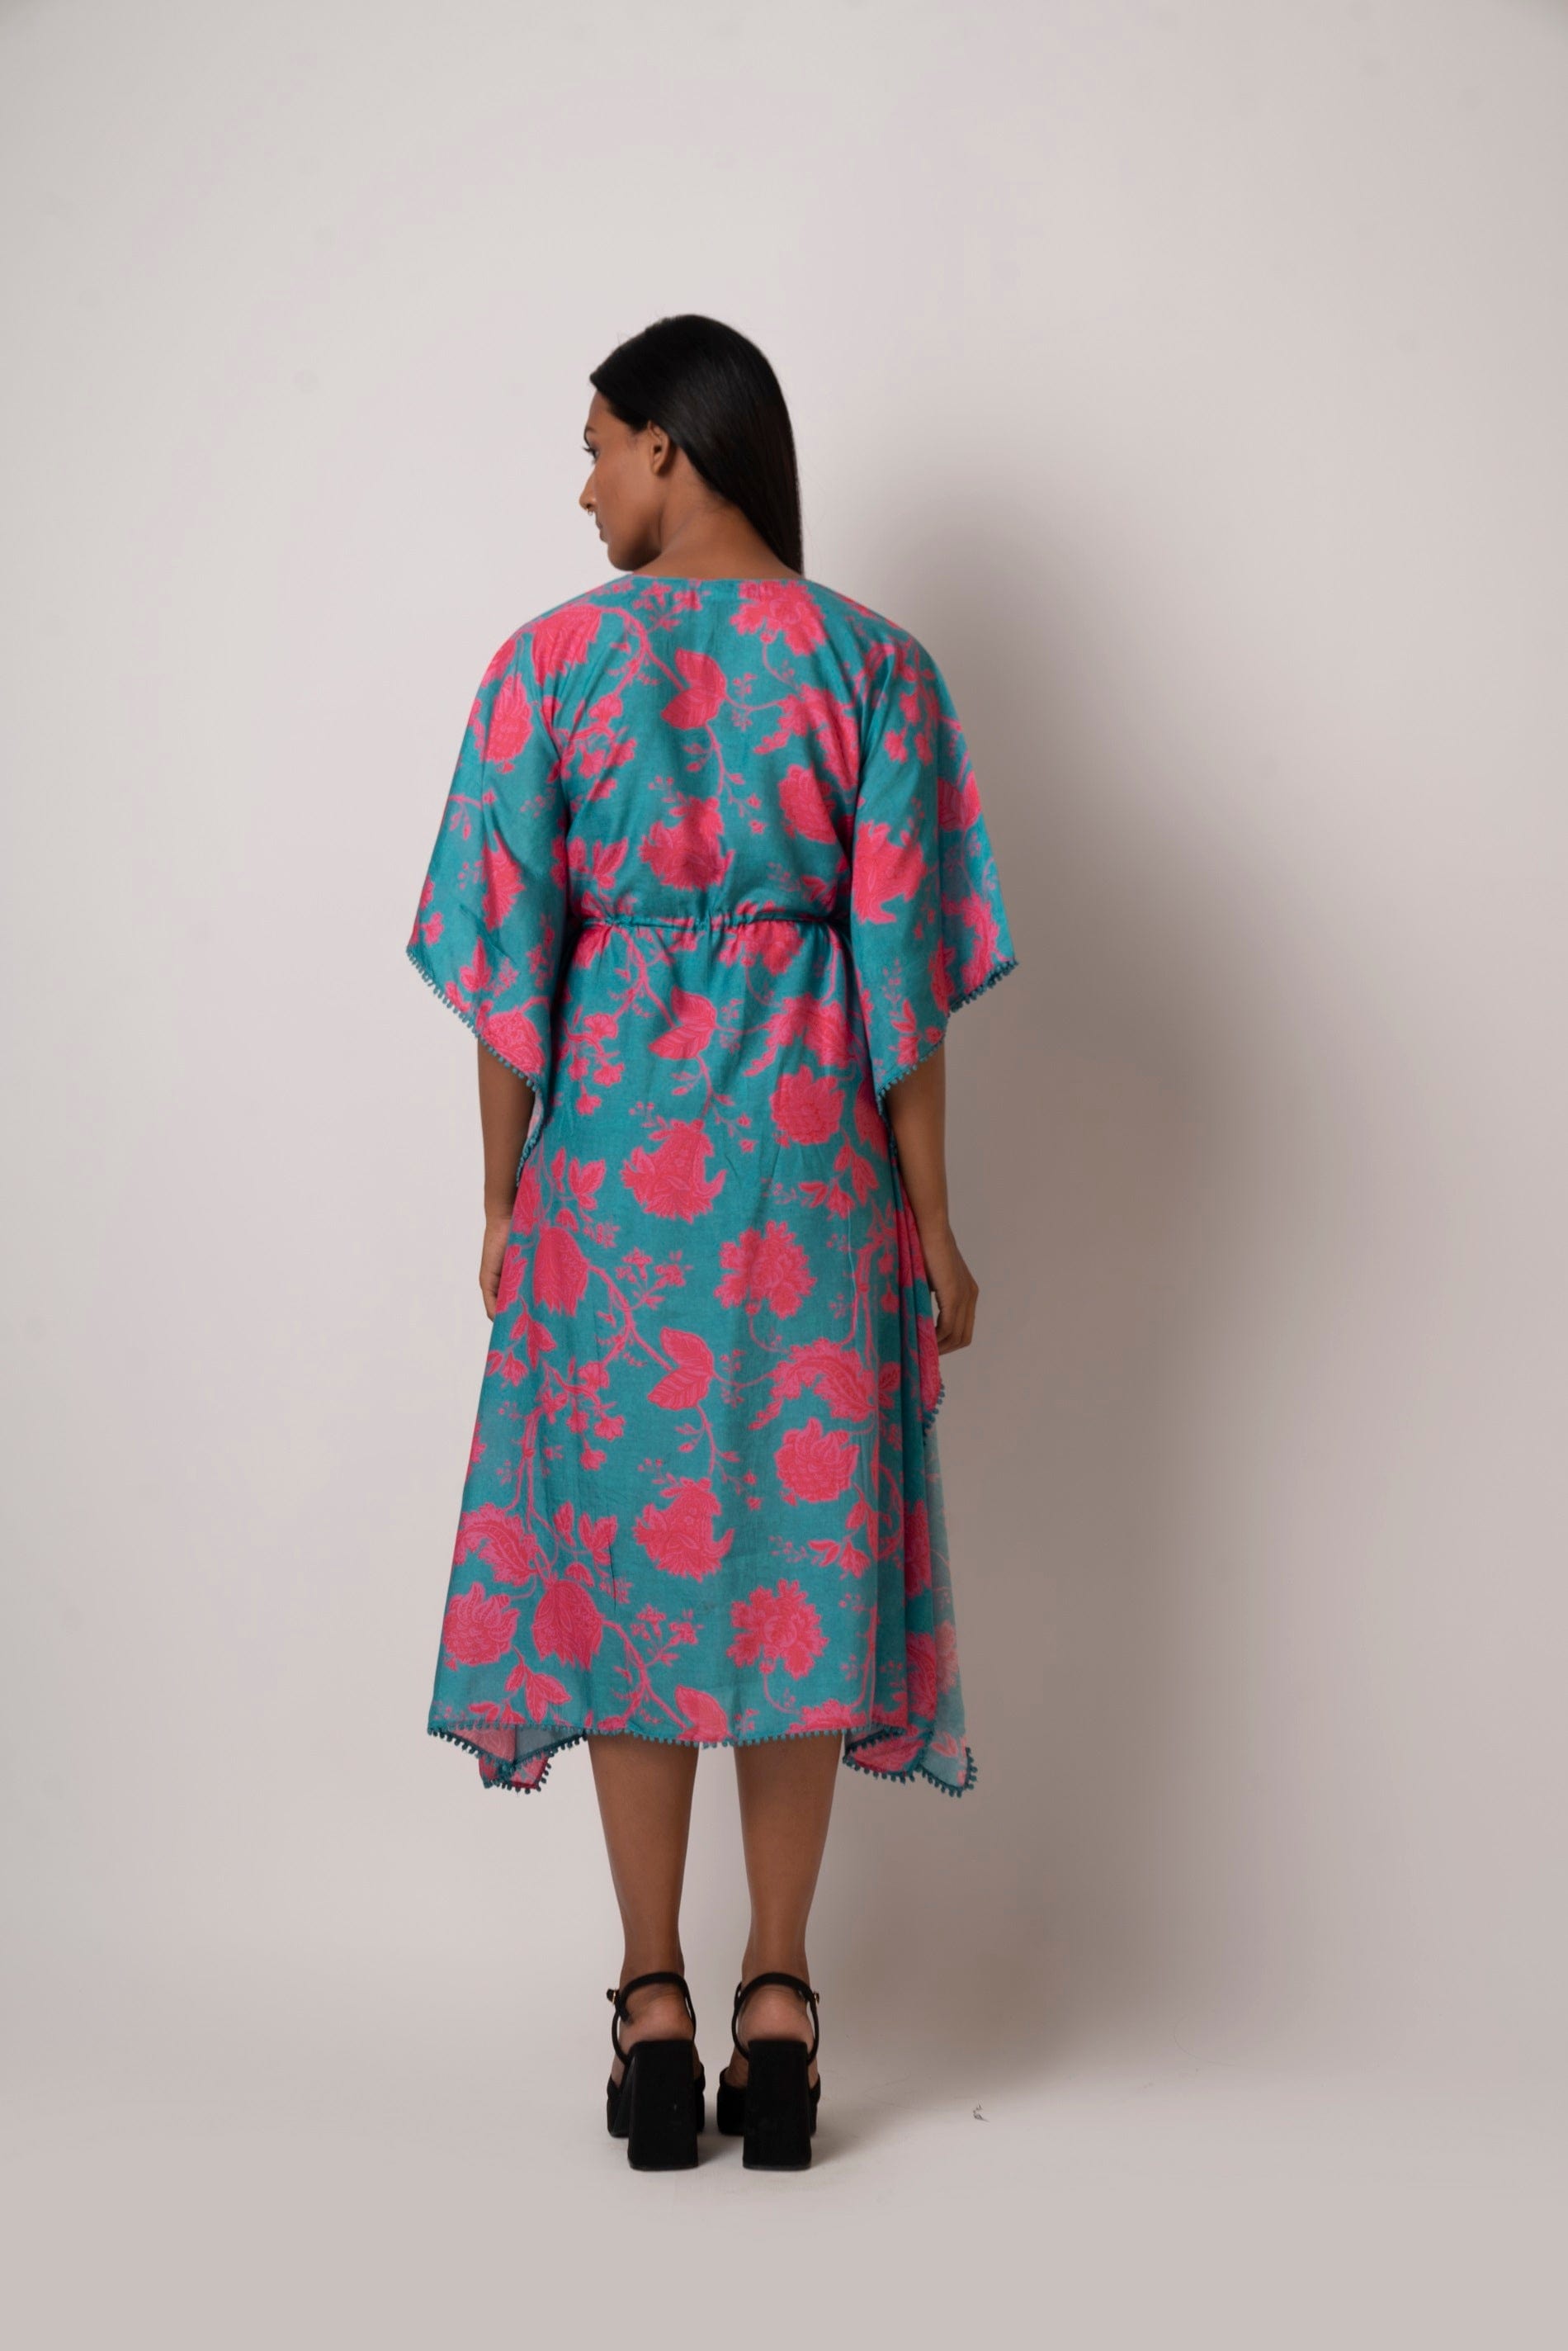 This long women's kaftan dress is crafted from breathable muslin fabric and has floral print. It's a casual resort attire